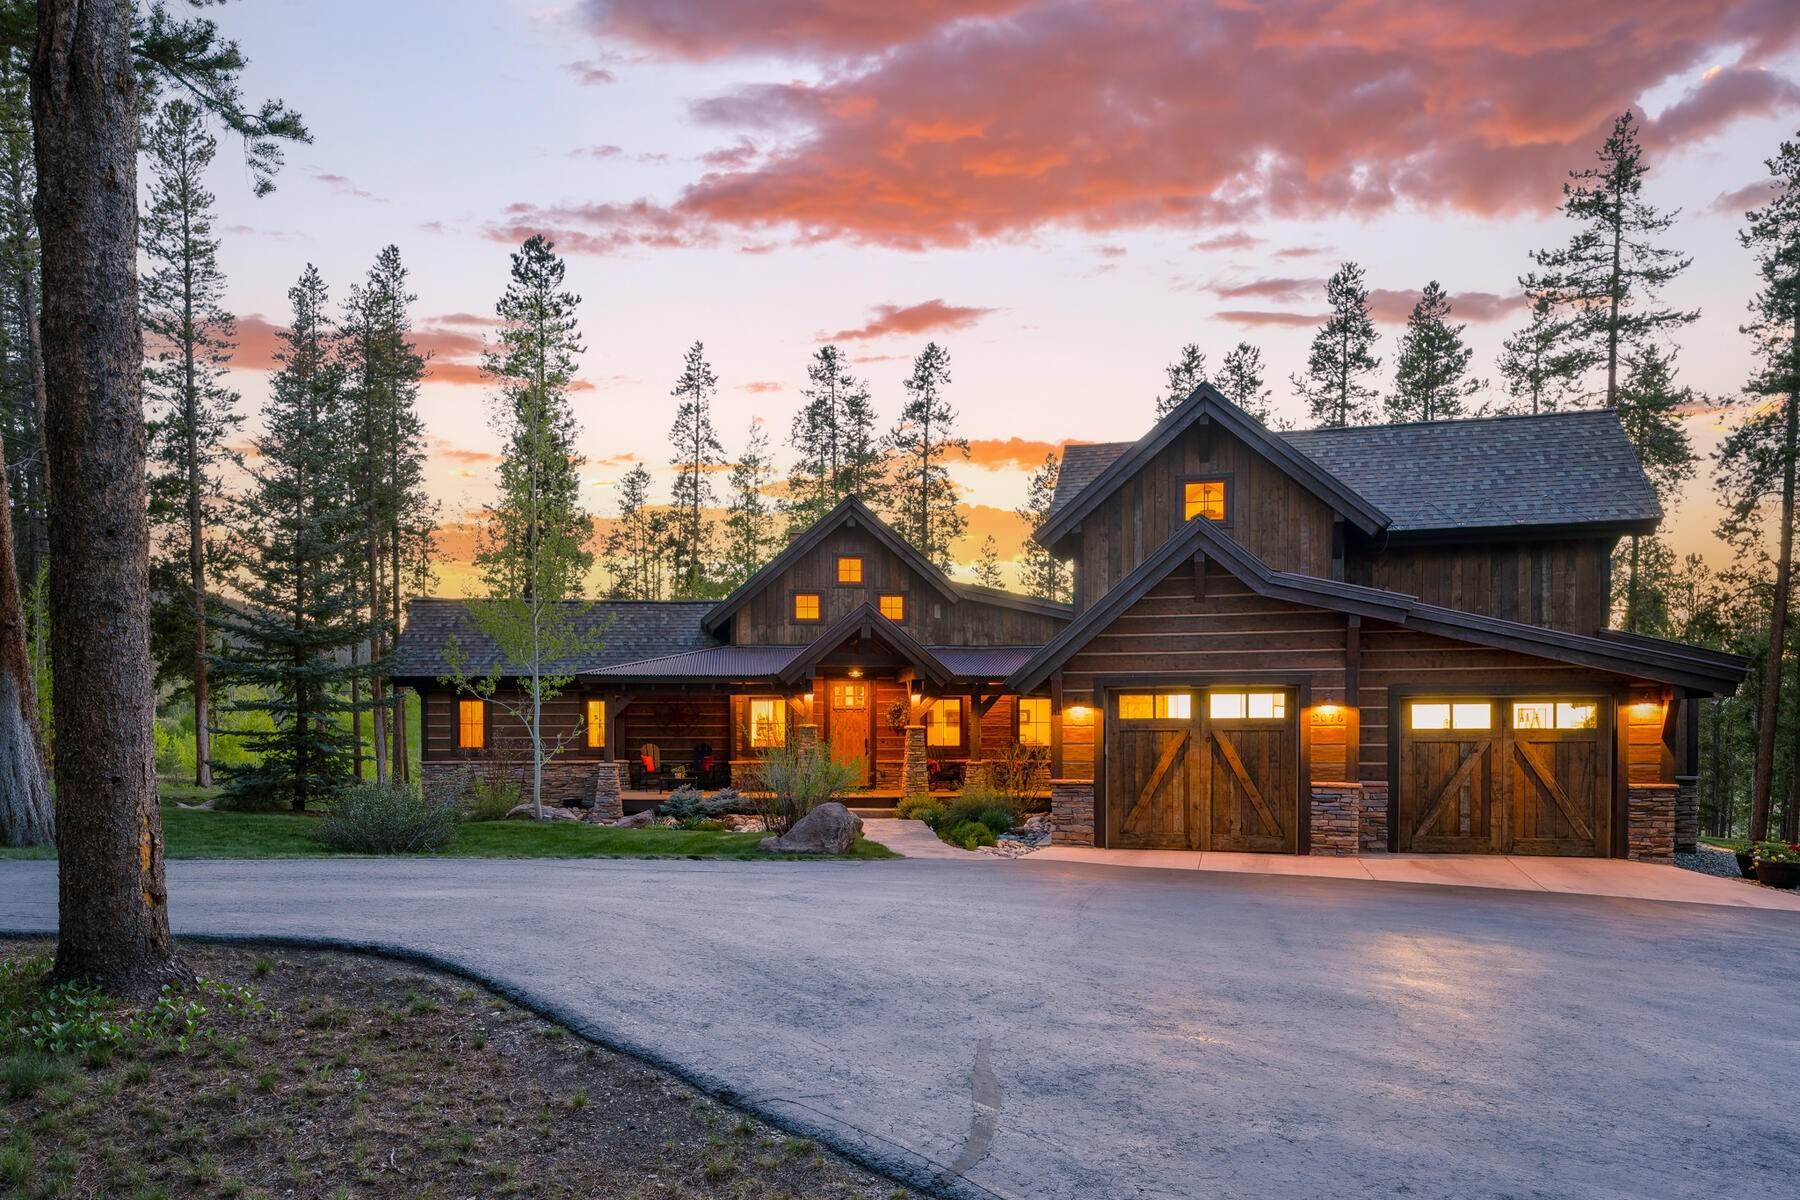 Single Family Homes for Active at Upscale Mountain Retreat 2076 GCR 519 Tabernash, Colorado 80478 United States